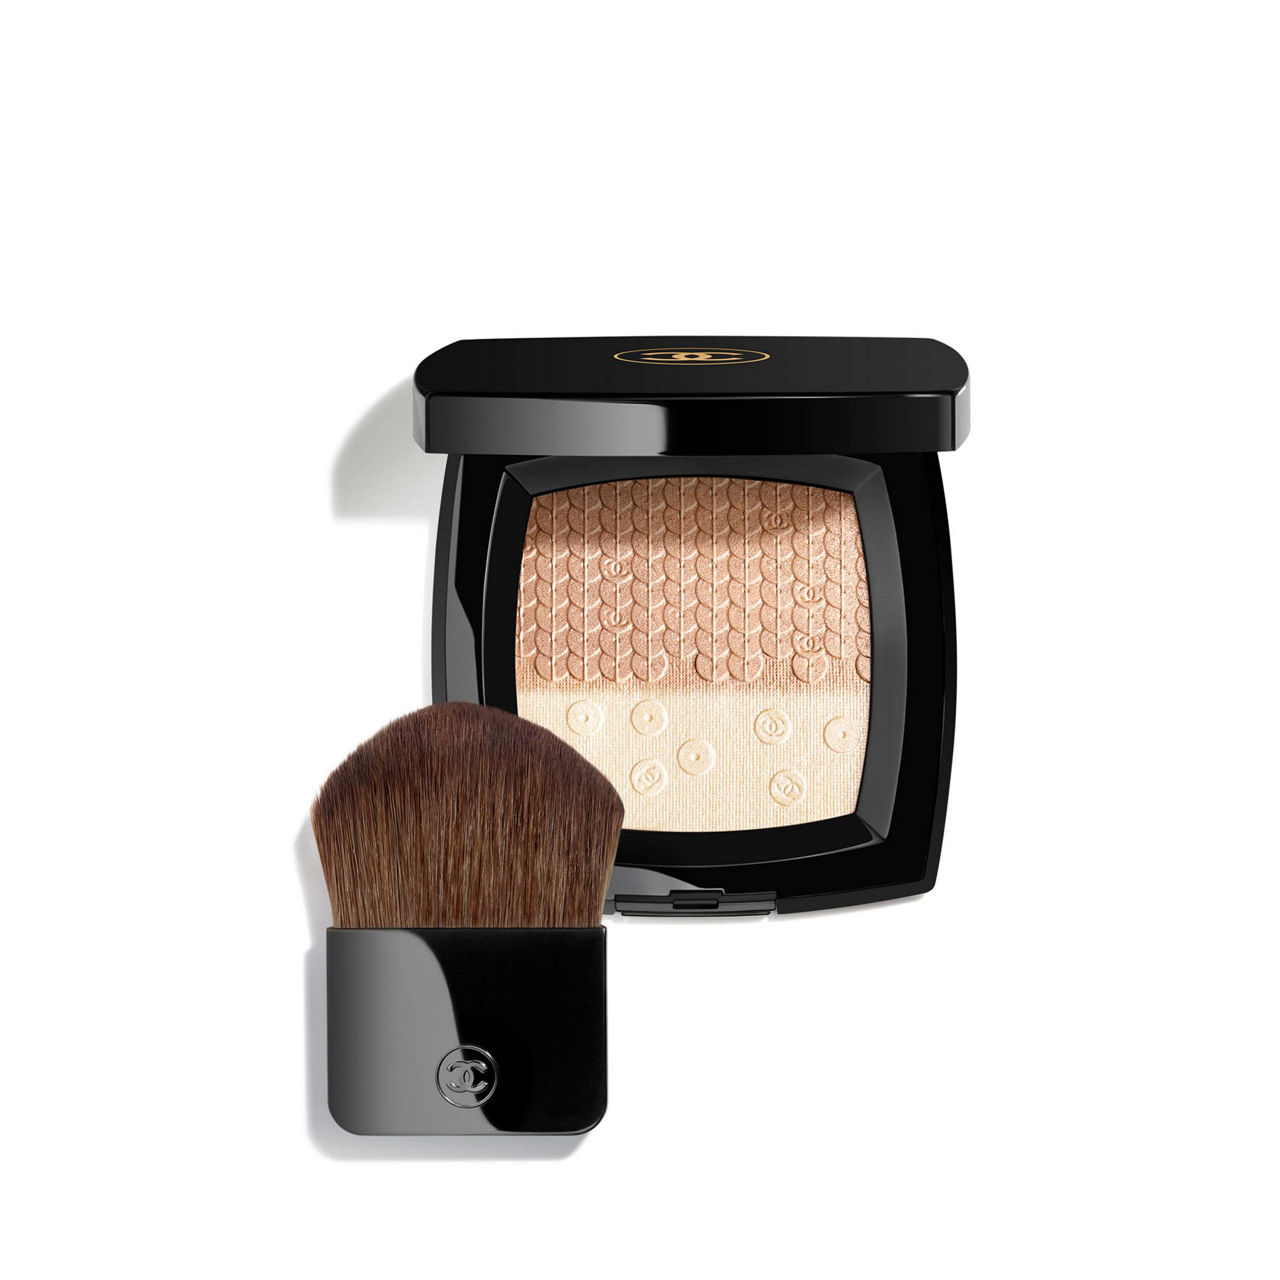 Review: Chanel Les Beiges Healthy Glow Sheer Powder with Comparison 